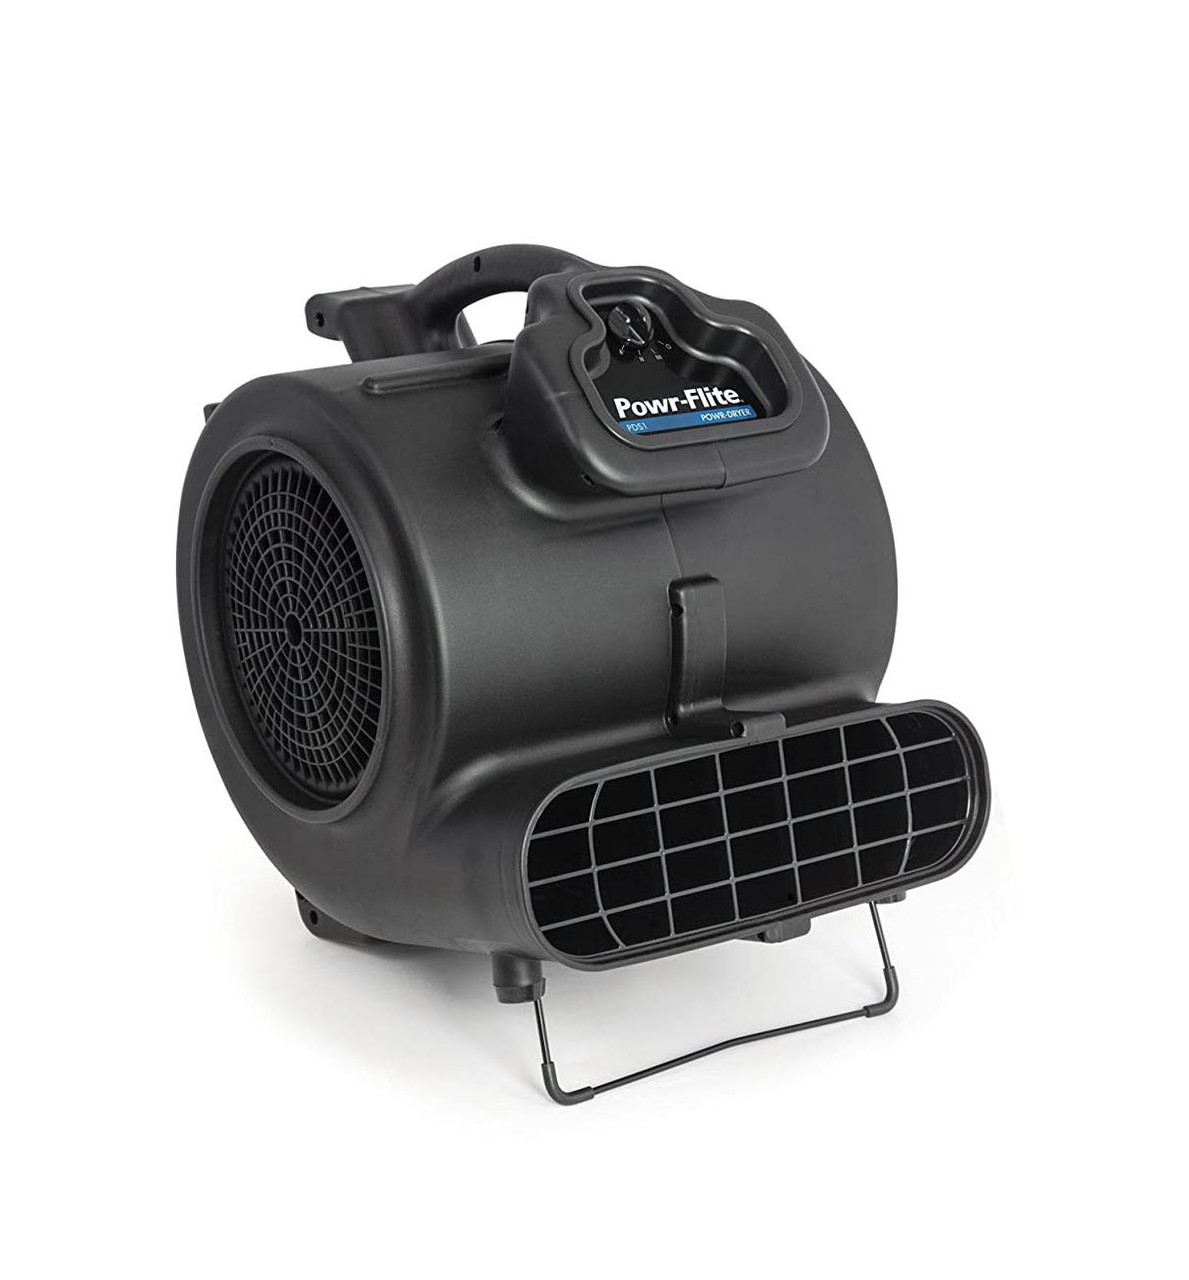 Powr-Flite Powr-Dryer Carpet Dryer/ Air Mover, Compact, 1/2 HP, 22 lbs. -  Coast Brothers